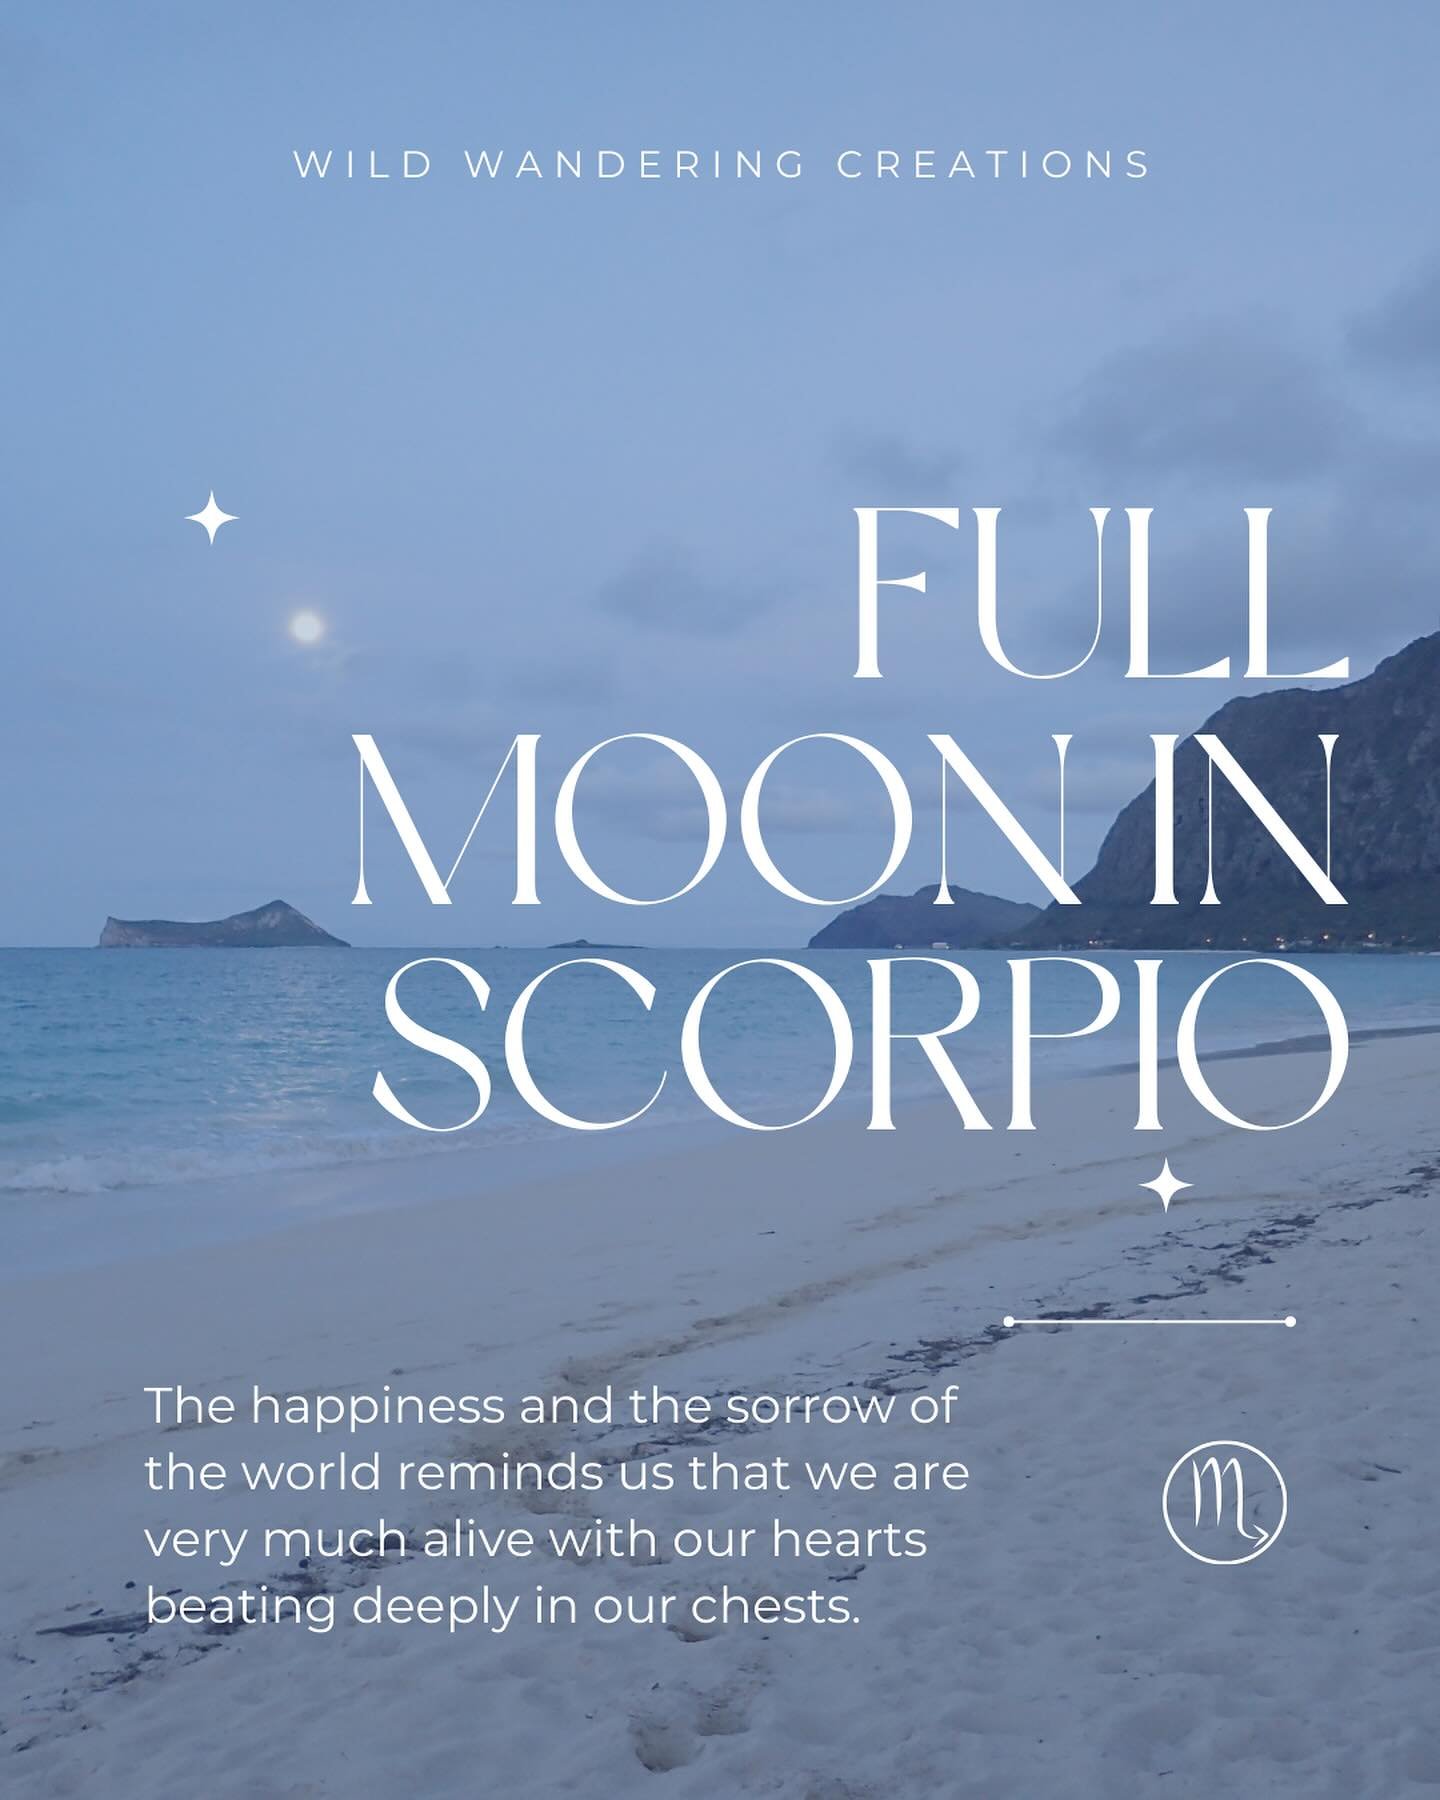 Happy Full Moon in Scorpio 🌝

The full moon arrives today at 7:49pm ET at 4&deg; in the sign of Scorpio. This is the first lunation post eclipse season. This full moon is ruled by the planet Mars, a planet that has been a heavy hitter this past mont